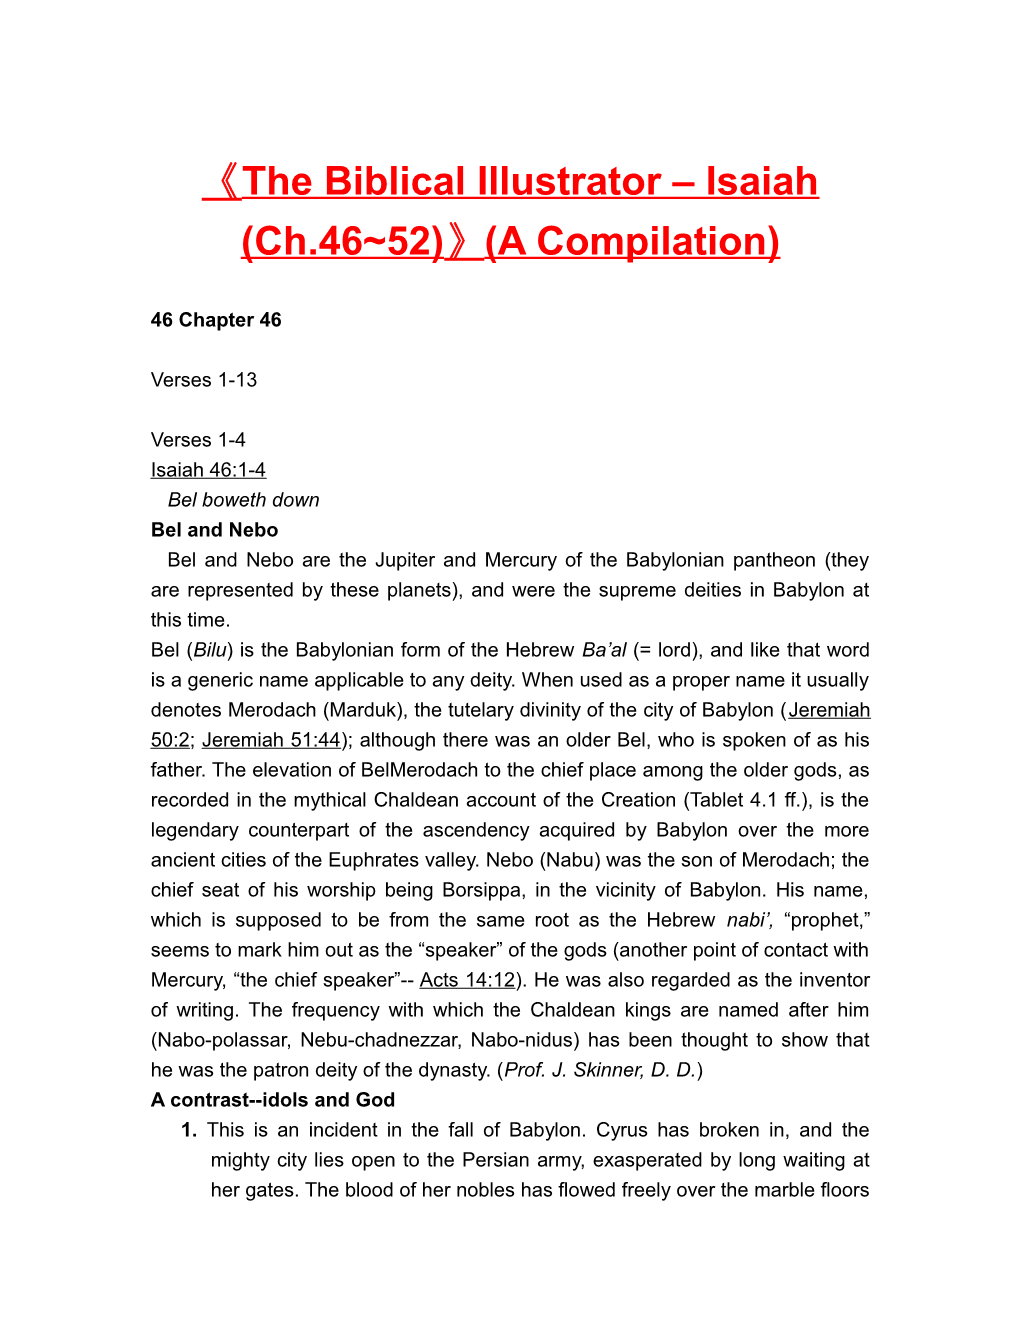 The Biblical Illustrator Isaiah (Ch.46 52) (A Compilation)